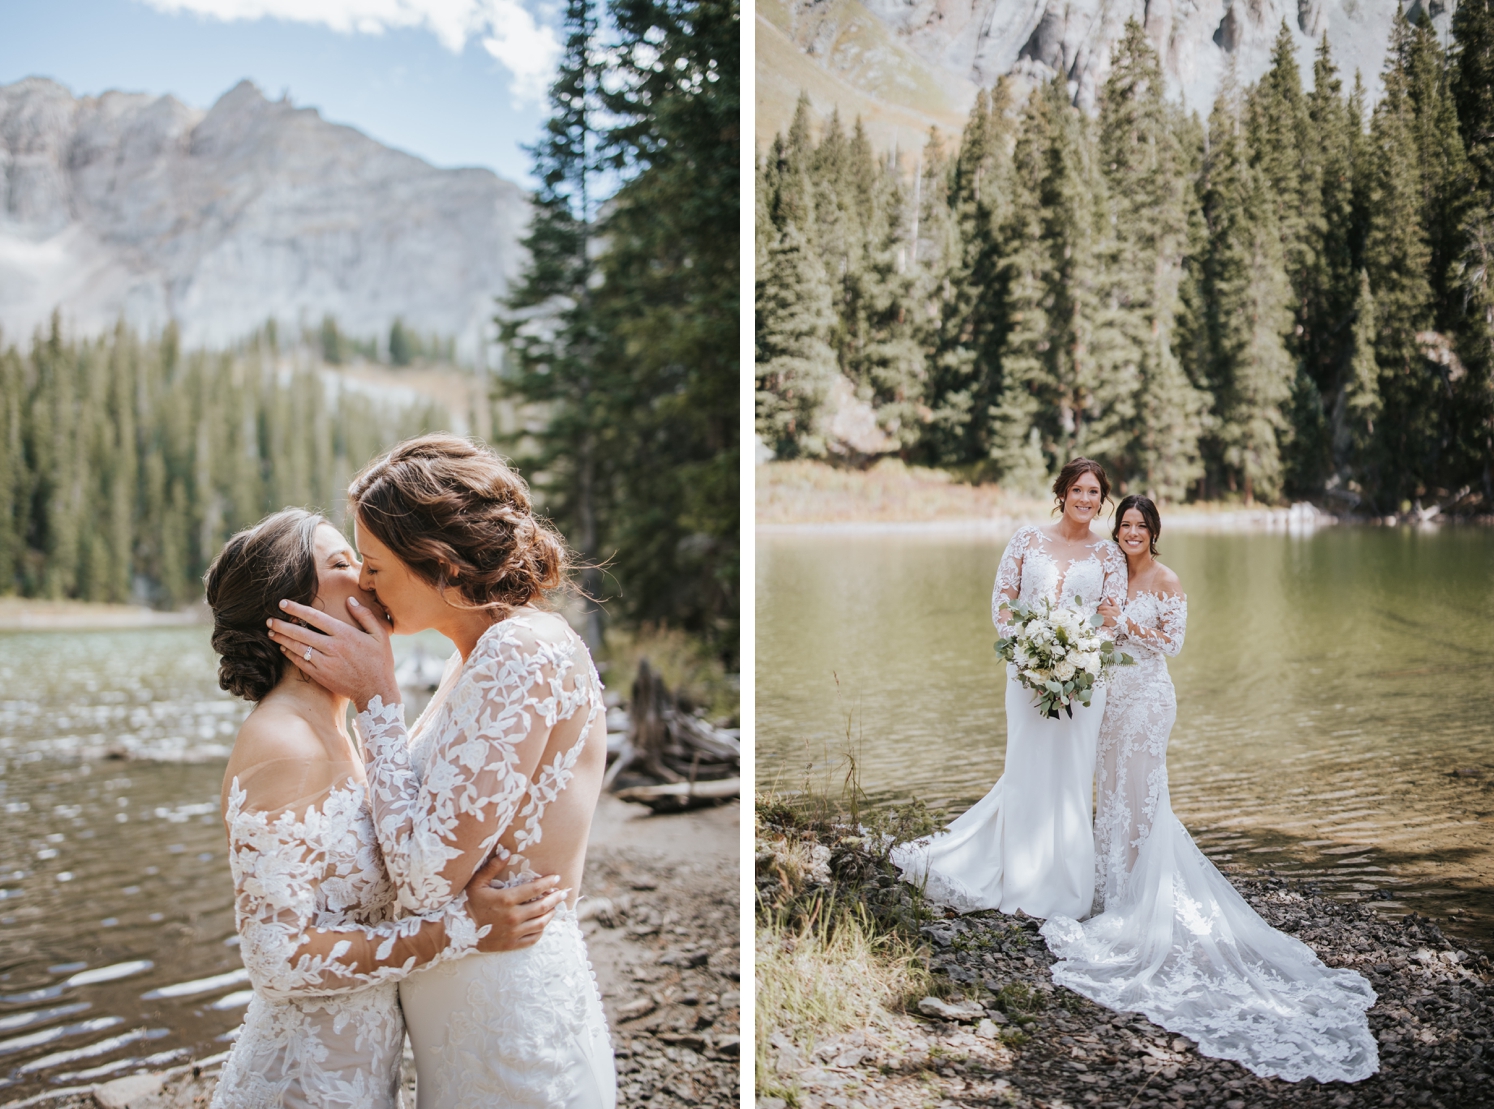 Brides kissing in front of mountains and lake at Telluride wedding | brides standing next to lake after wedding ceremony | McArthur Weddings and Events